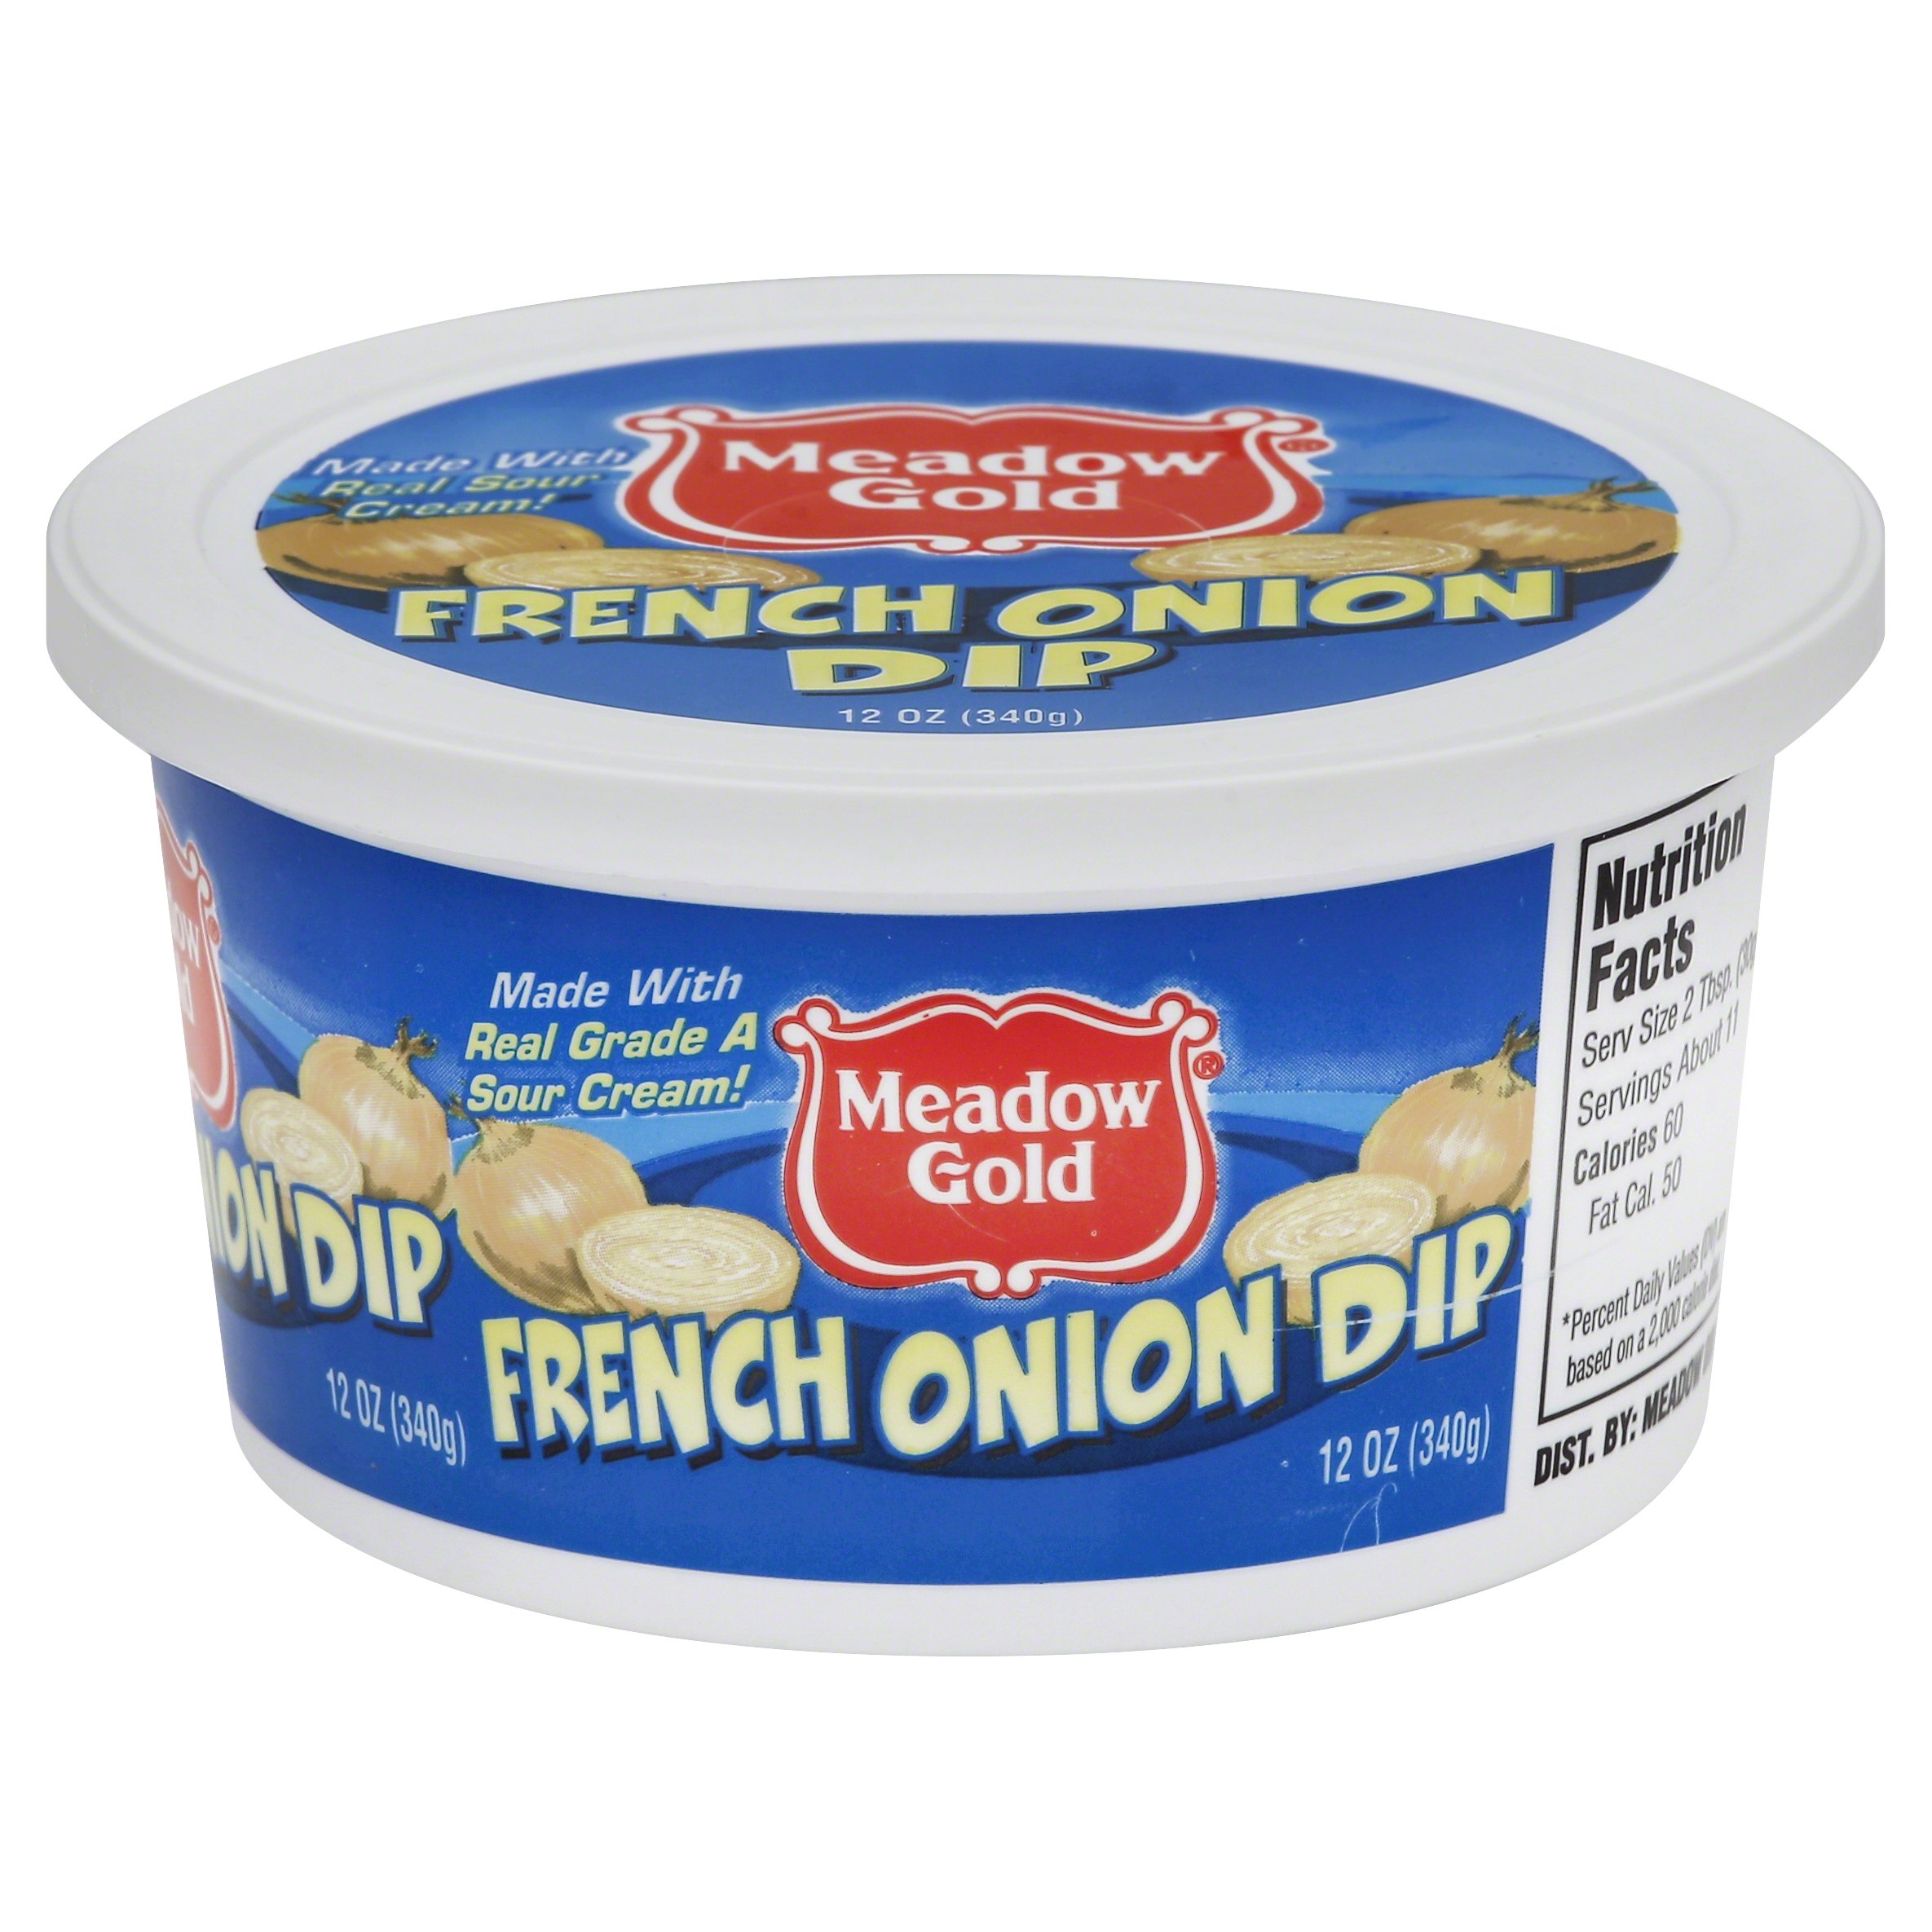 Meadow Gold French Onion Dip